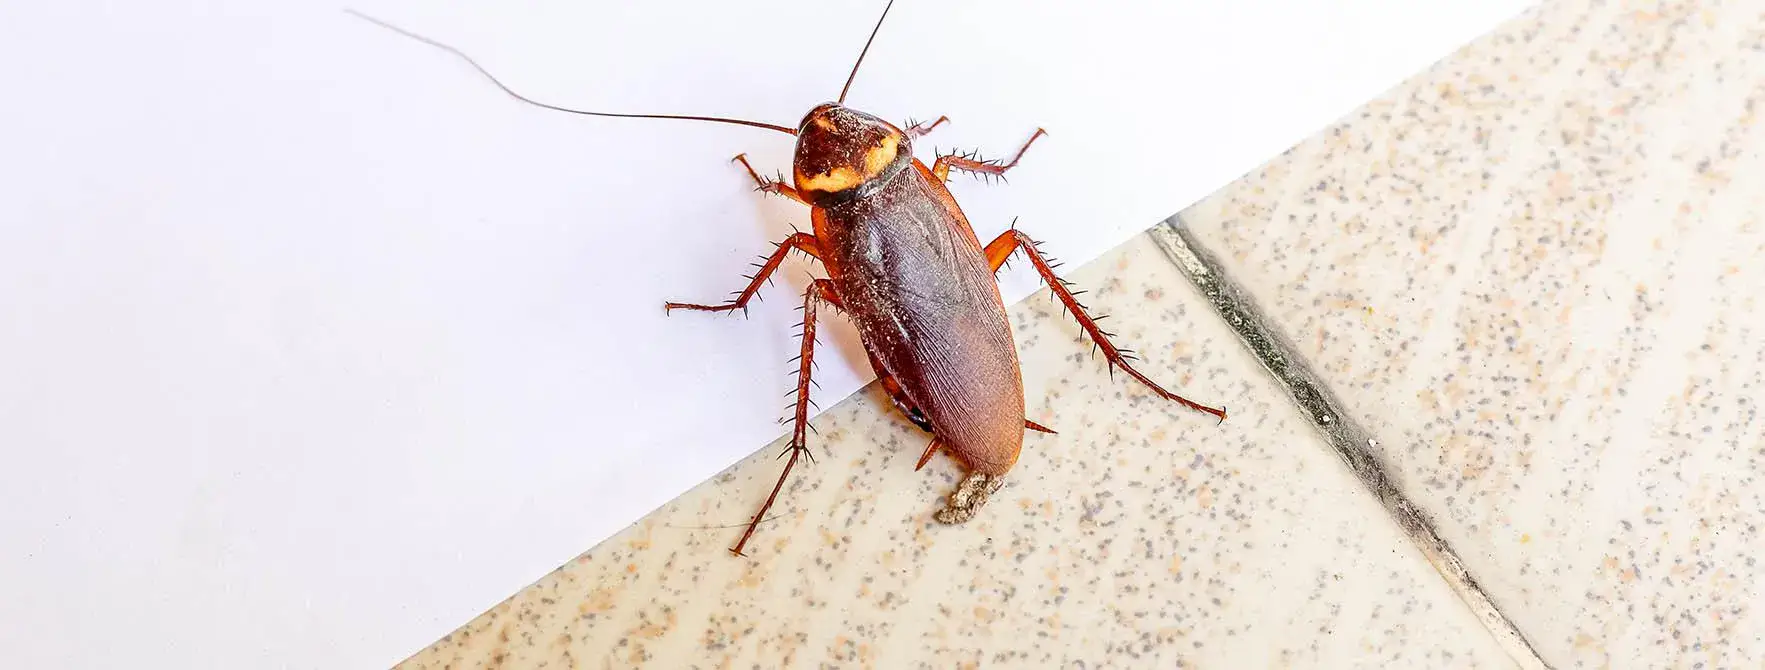 Cockroach Extermination in Toronto and the GTA.